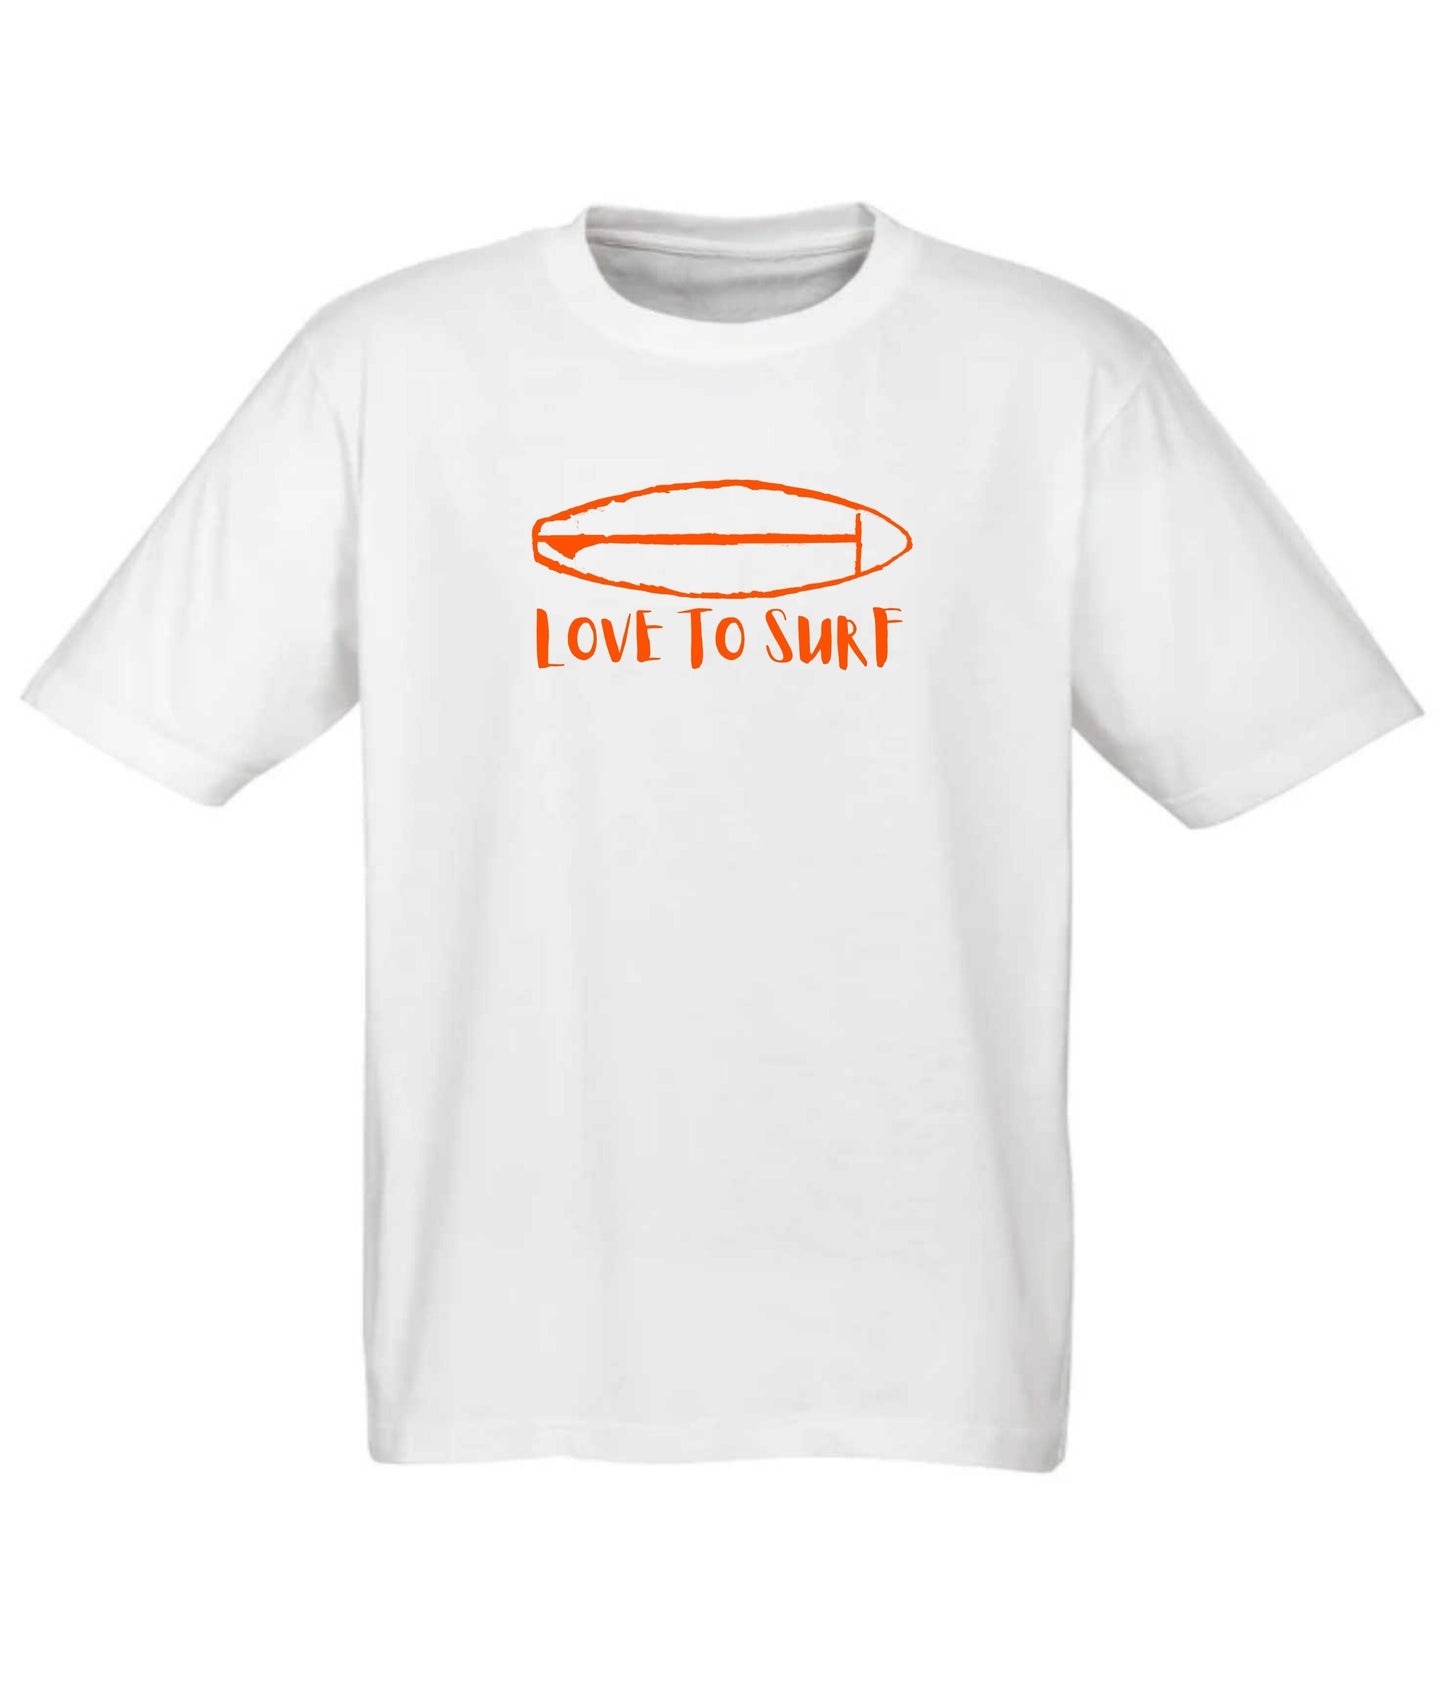 Tee - Love To Surf (White) - Frame 'n' Copy